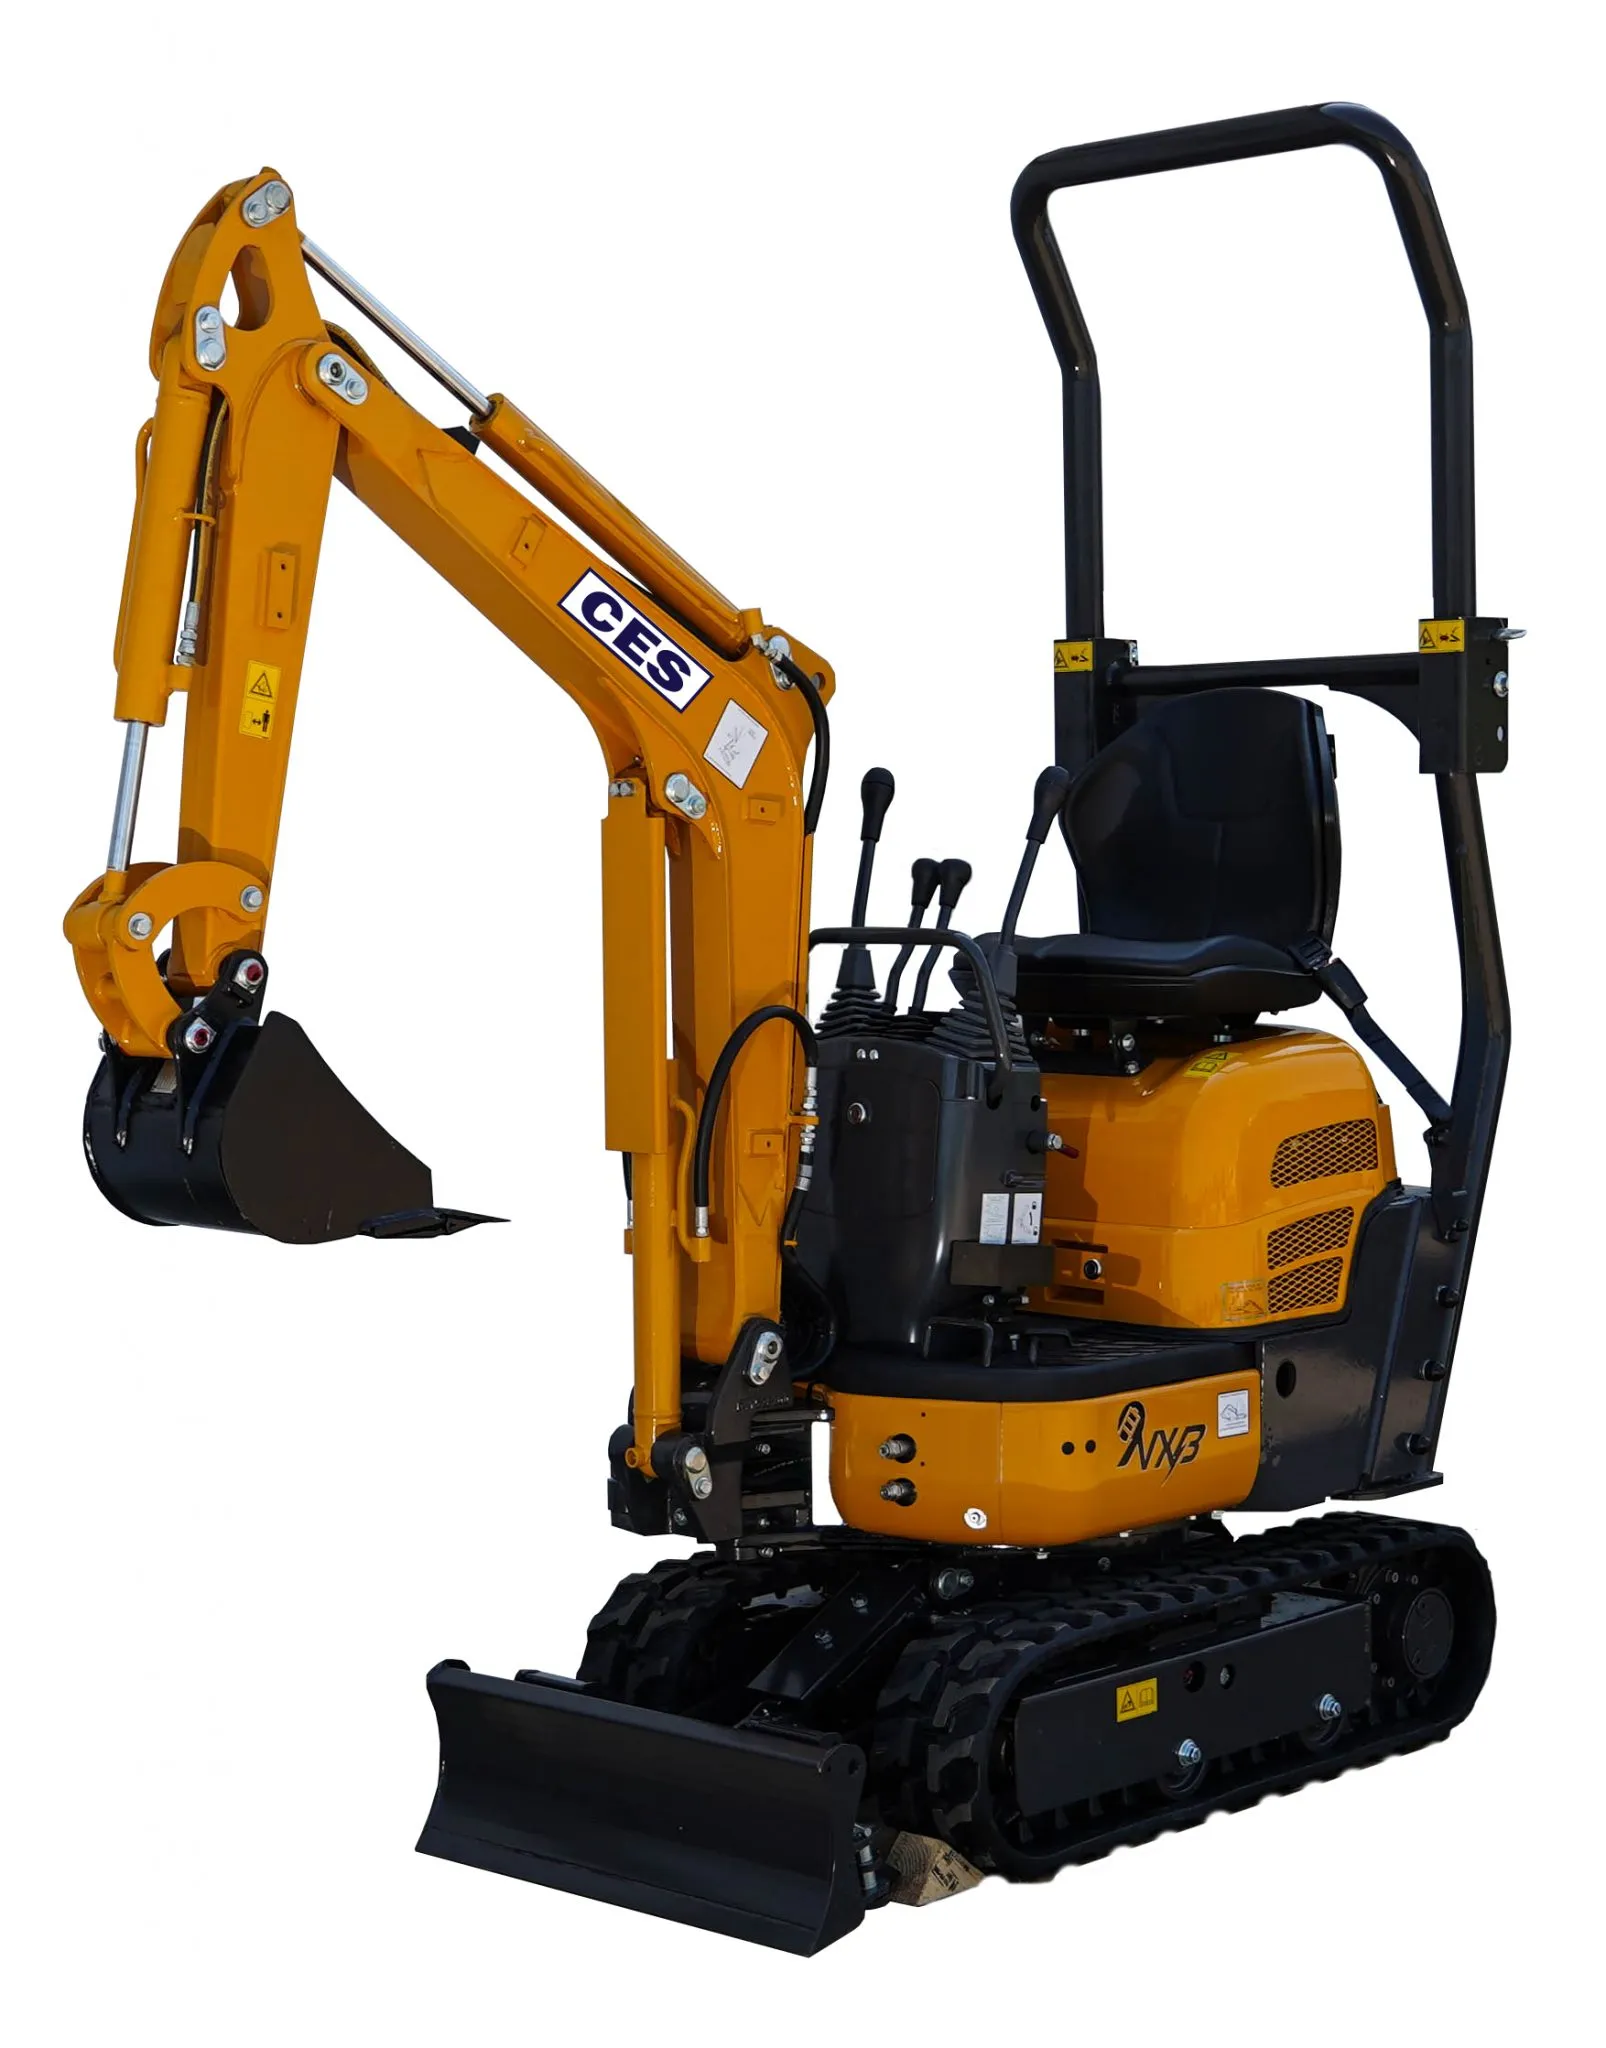 MINI EXCAVATOR 5′-2″ BATTERY OPERATED RUBBER TRACK